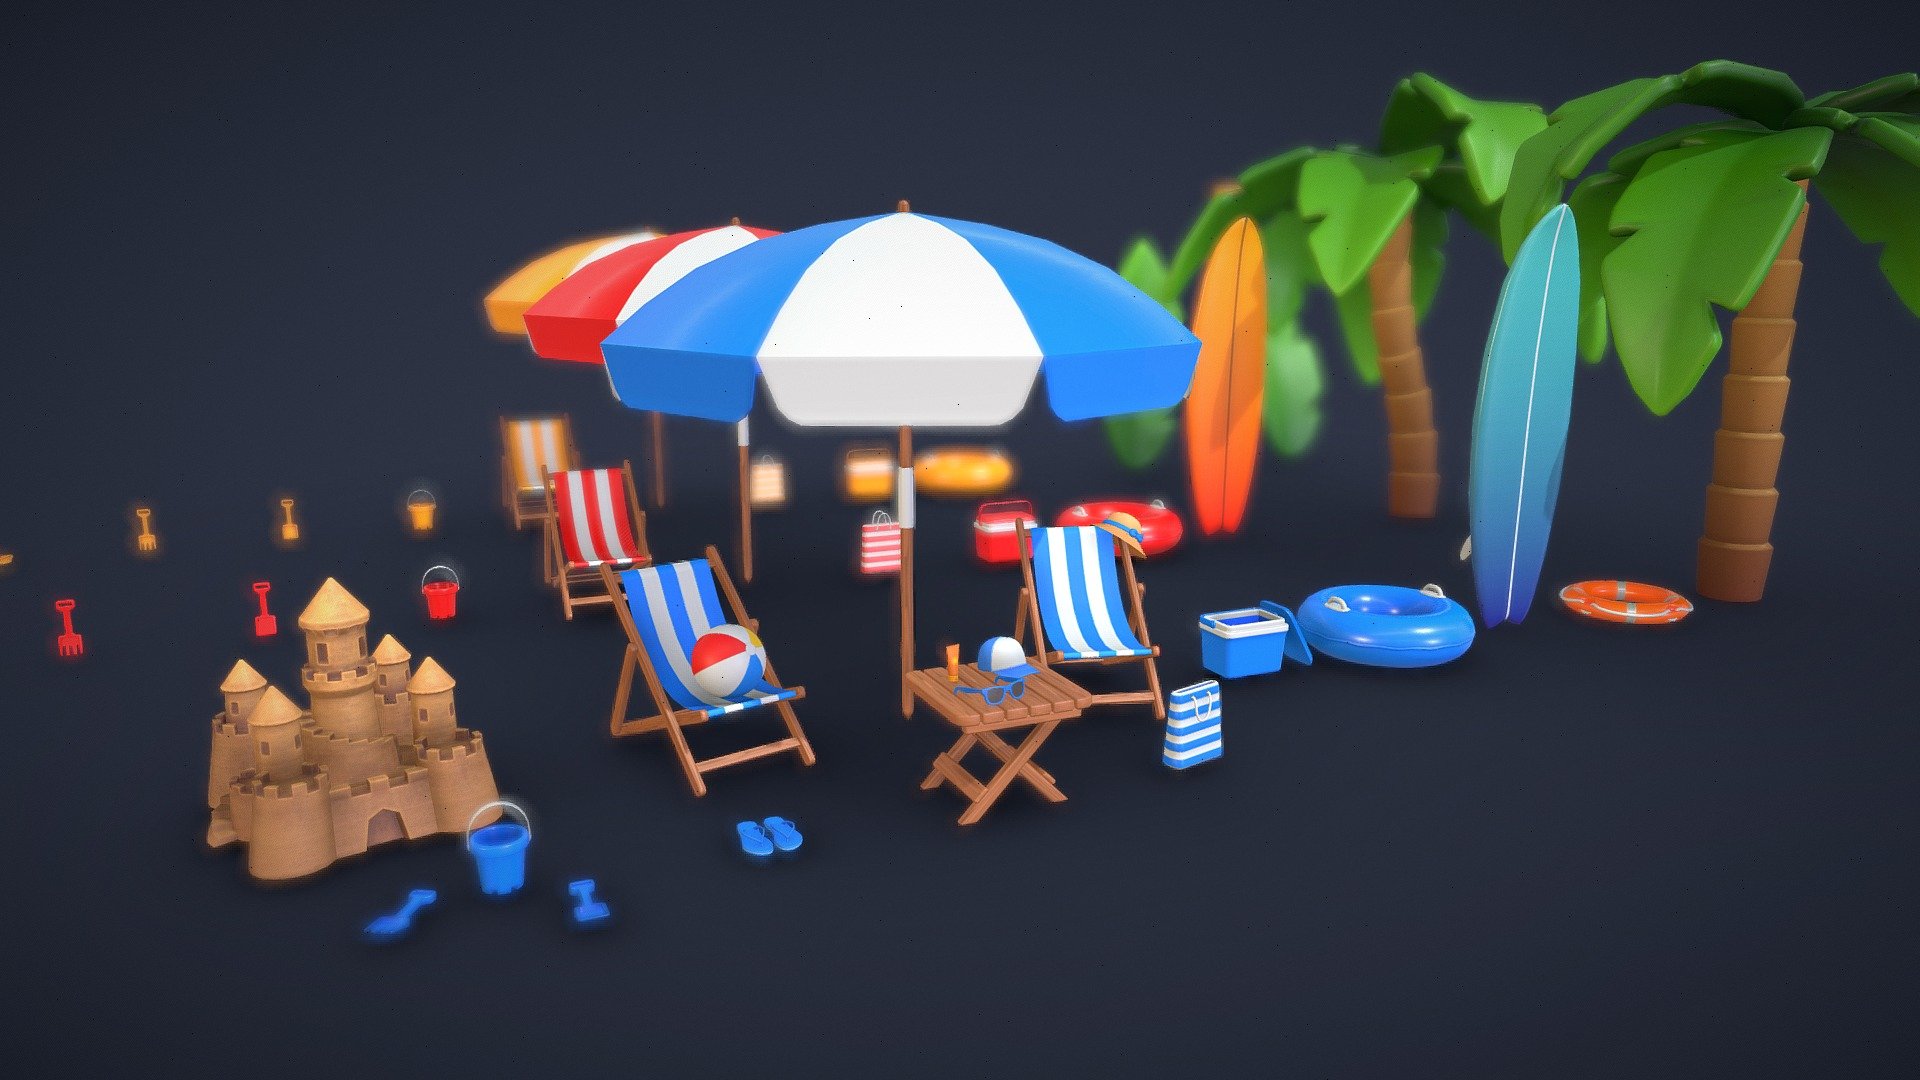 Pack of 44 different models for beach

Pack include:




Beach Bag - 1 548 tris

Beach Ball - 768 tris

Beach Chair - 1 066 tris

Beach Slippers - 2 052 tris

Beach Table - 848 tris

Beach Umbrella - 824 tris

Bucket - 1 784 tris

Cap - 784 tris

Cooler - 1 480 tris

Lifebuoy - 3 152 tris

Palm Tree - 4 200 tris

Rake - 516 tris

Sand Castle - 3 055 tris

Shovel - 420 tris

Sun Hat - 1 416 tris

Sunglasses - 952 tris

Sunscreen - 526 tris

Surfboard - 696 tris

Swim Ring - 1 408 tris

Diffuse, Normal, Roughness and Metalic textures

2048 x 2048 PNG textures

AR / VR / Mobile ready - Big Beach Pack - Buy Royalty Free 3D model by Andrii Sedykh (@andriisedykh) 3d model